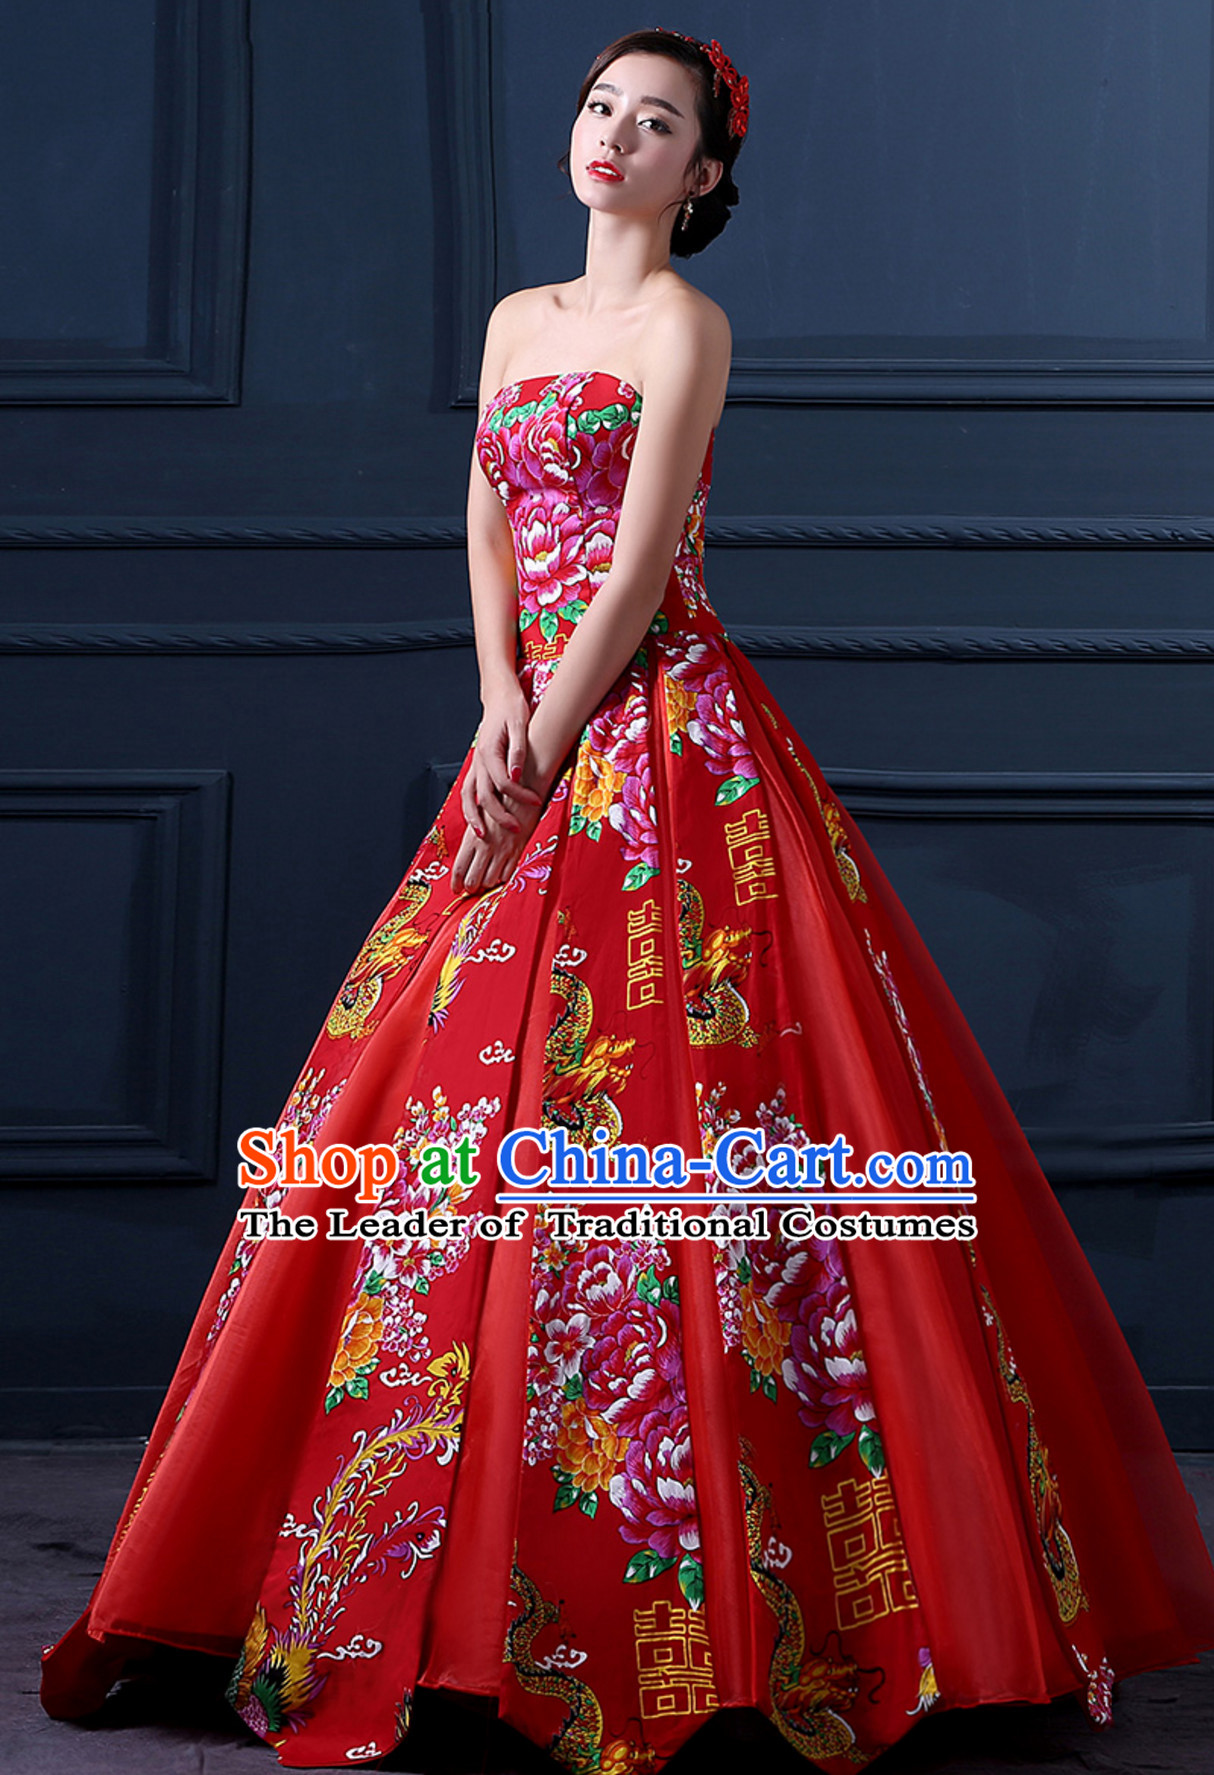 Supreme Chinese Stunning Made to Order Lucky Red Long Wedding Evening Dress